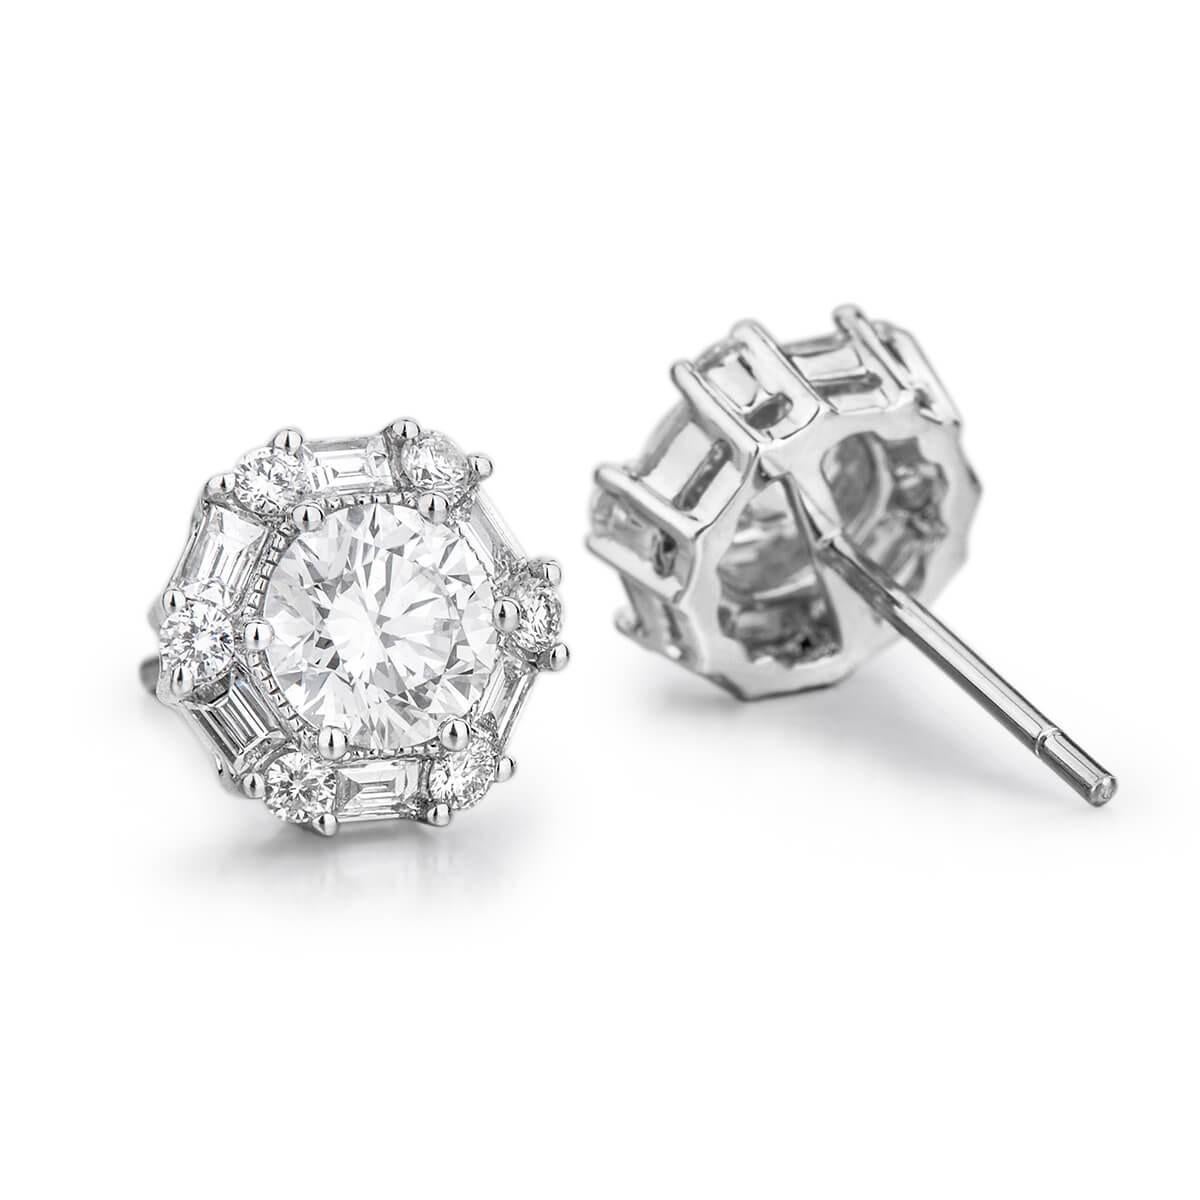 WHITE GOLD DIAMOND STUD EARRINGS - 1.75 CT


Set in 18K White gold


Total centre diamond weight: 1.24 ct - [ 0.60 ct and 0.64 ct ]
[ 2 diamonds ]
Color: G
Clarity: VS2 and SI1

Total small brilliant cut diamond weight: 0.23 ct
[ 12 diamonds